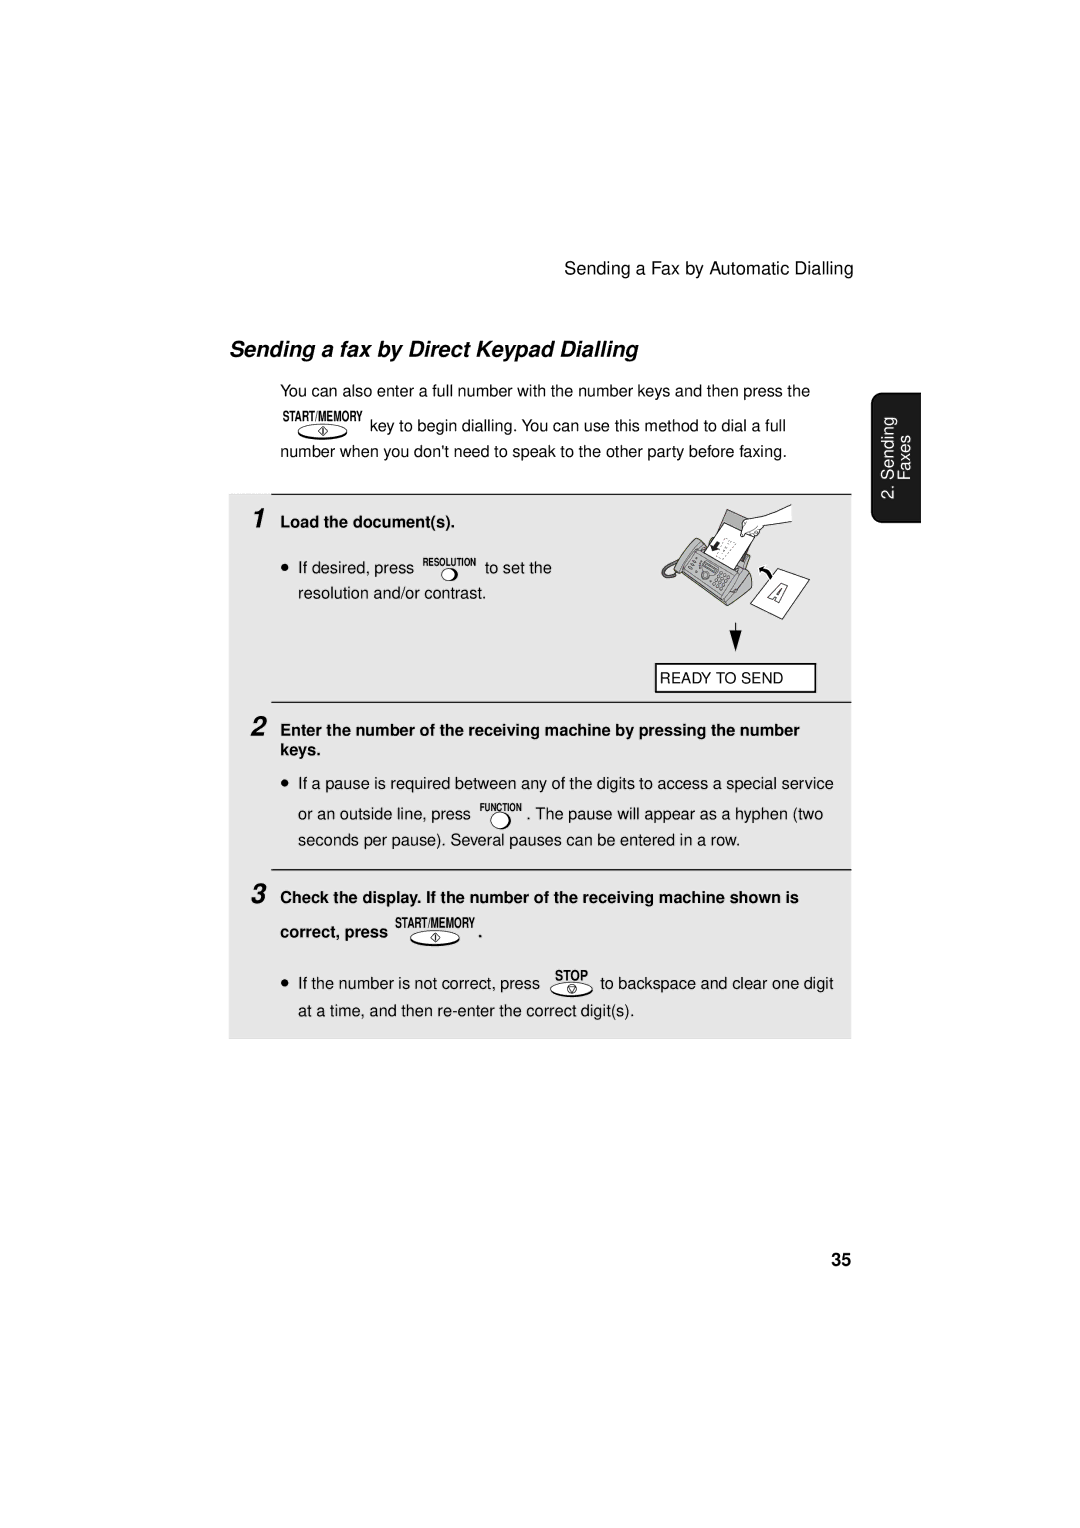 Sharp FO-P610/FO-P630 operation manual Sending a fax by Direct Keypad Dialling, Load the documents 